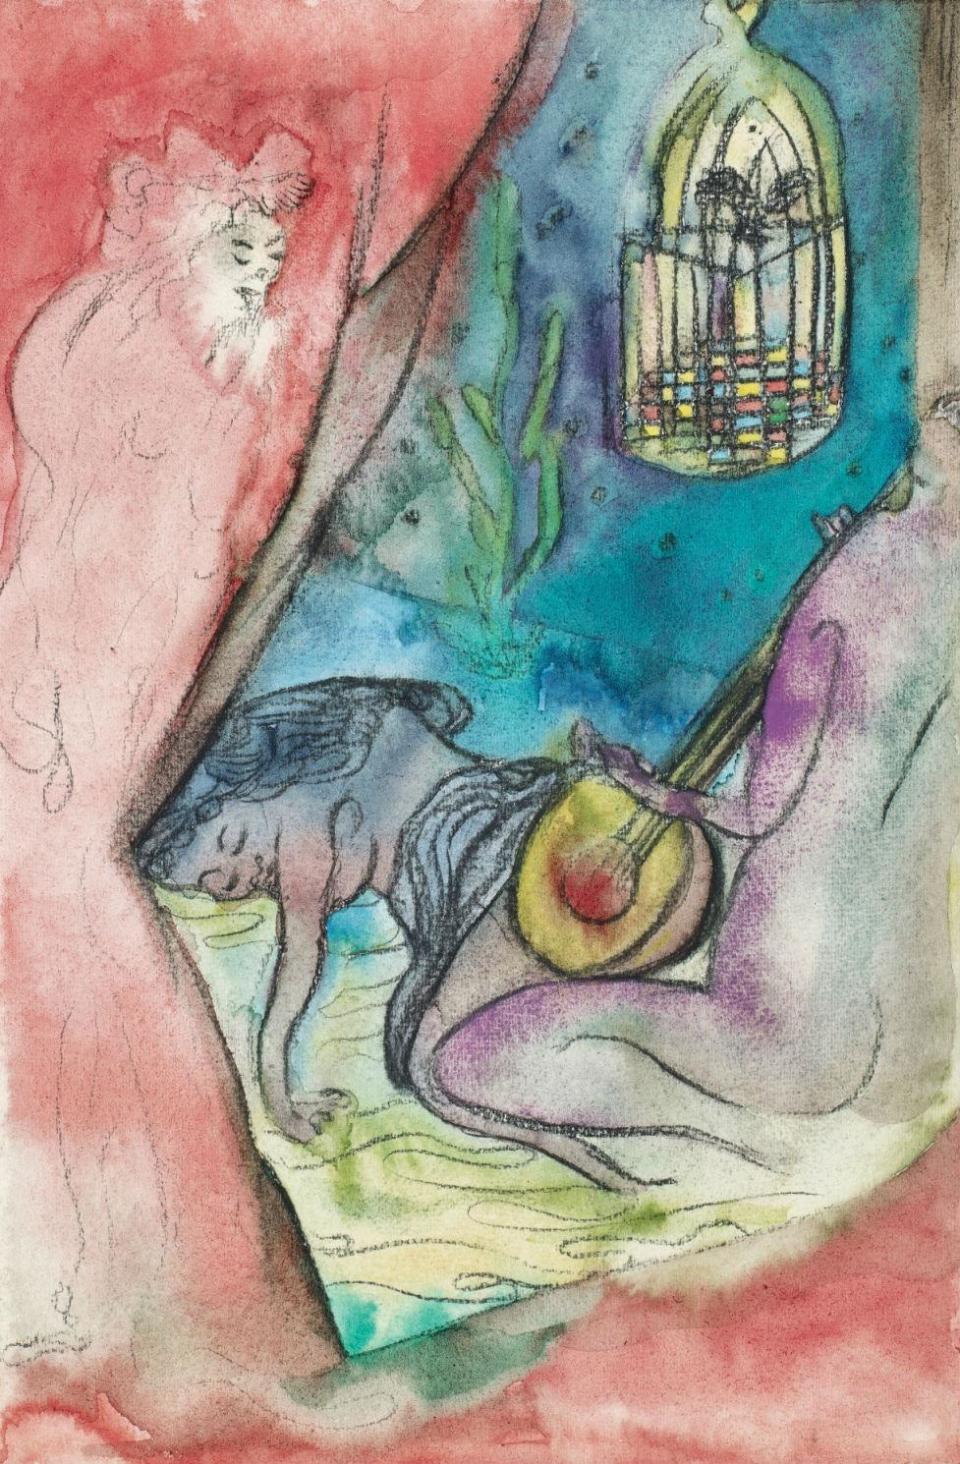 Chris Ofili, 'The Caged Bird's Song (Voyeur)', 2014. Watercolour and charcoal on paper (© Chris Ofili Courtesy the artist and Victoria Miro, London)